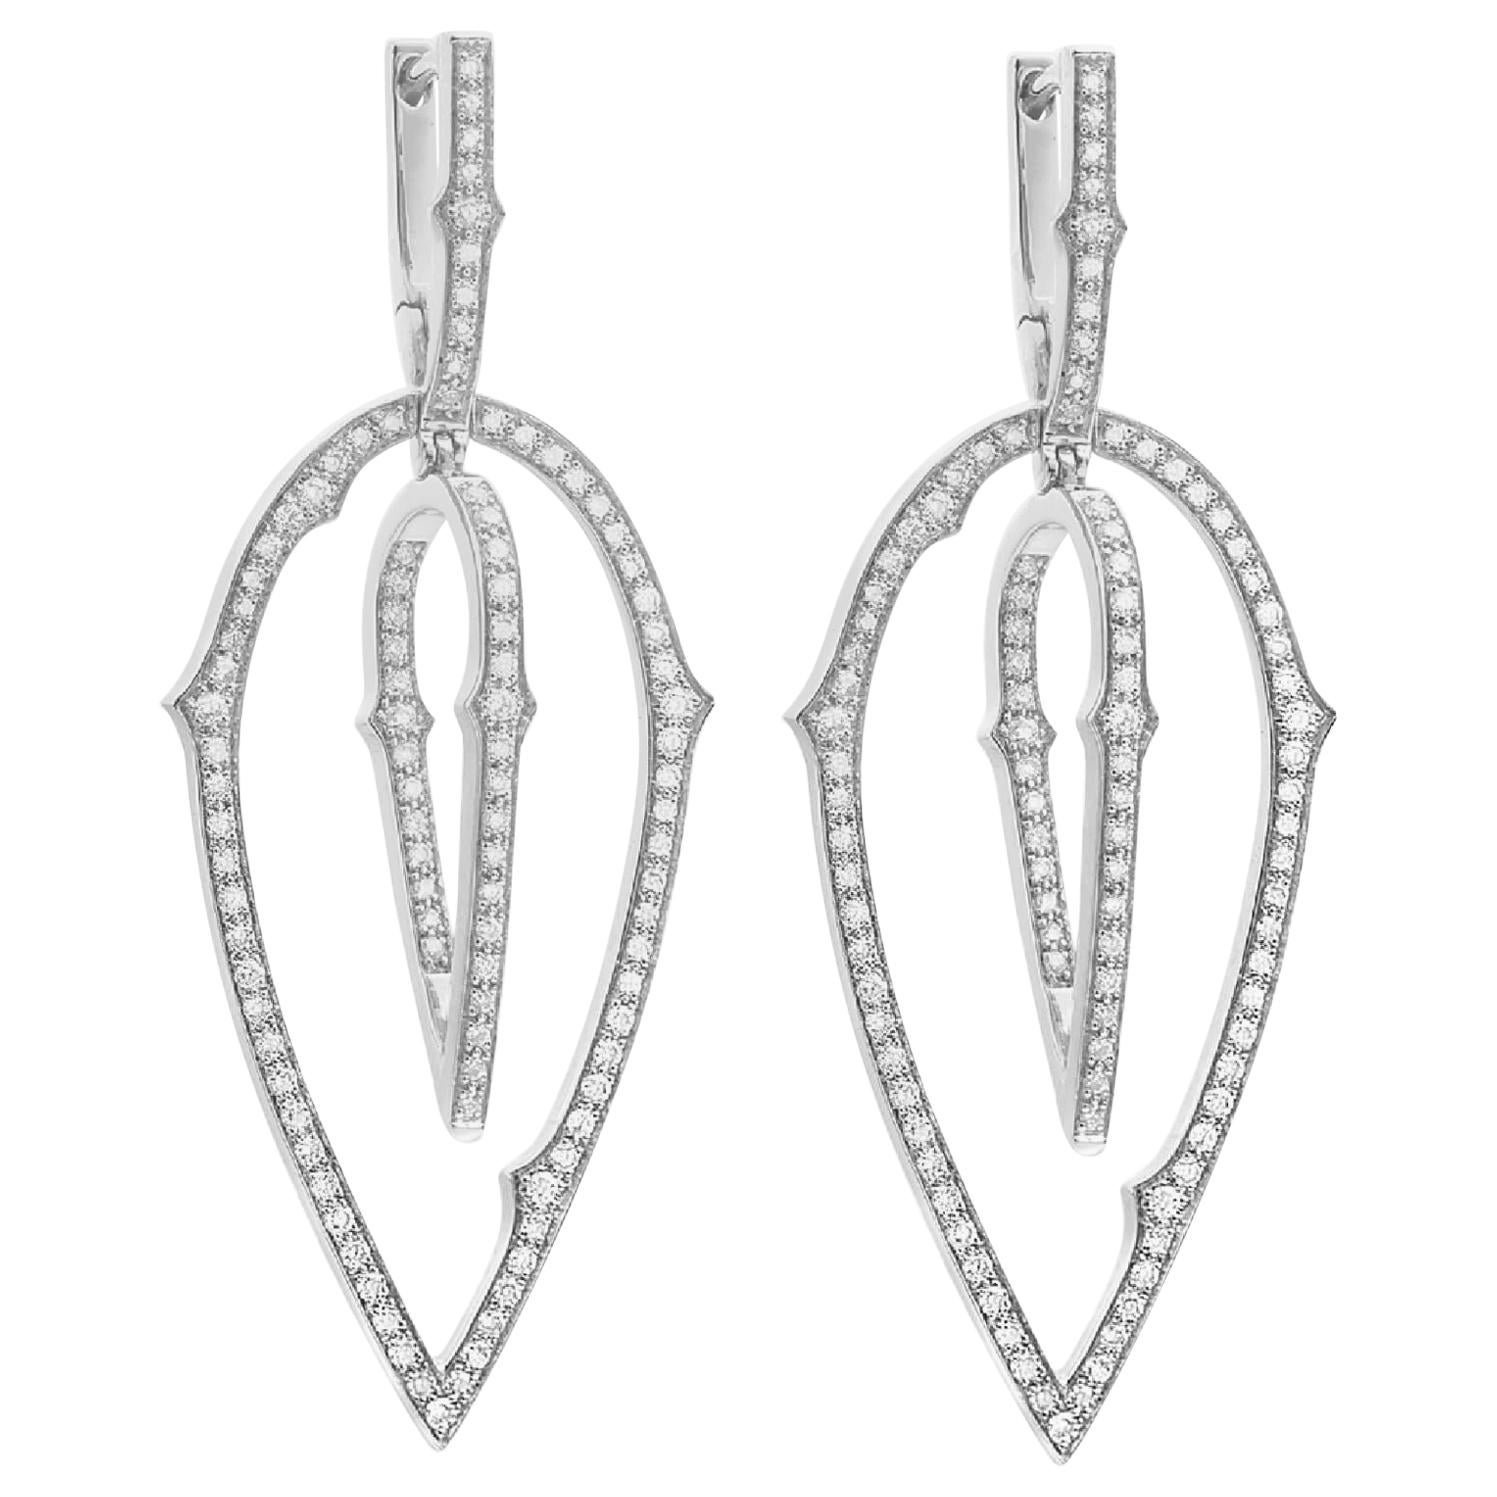 Stephen Webster Thorn 18 Carat Gold and White Diamond 3D Large Hoop Earrings For Sale